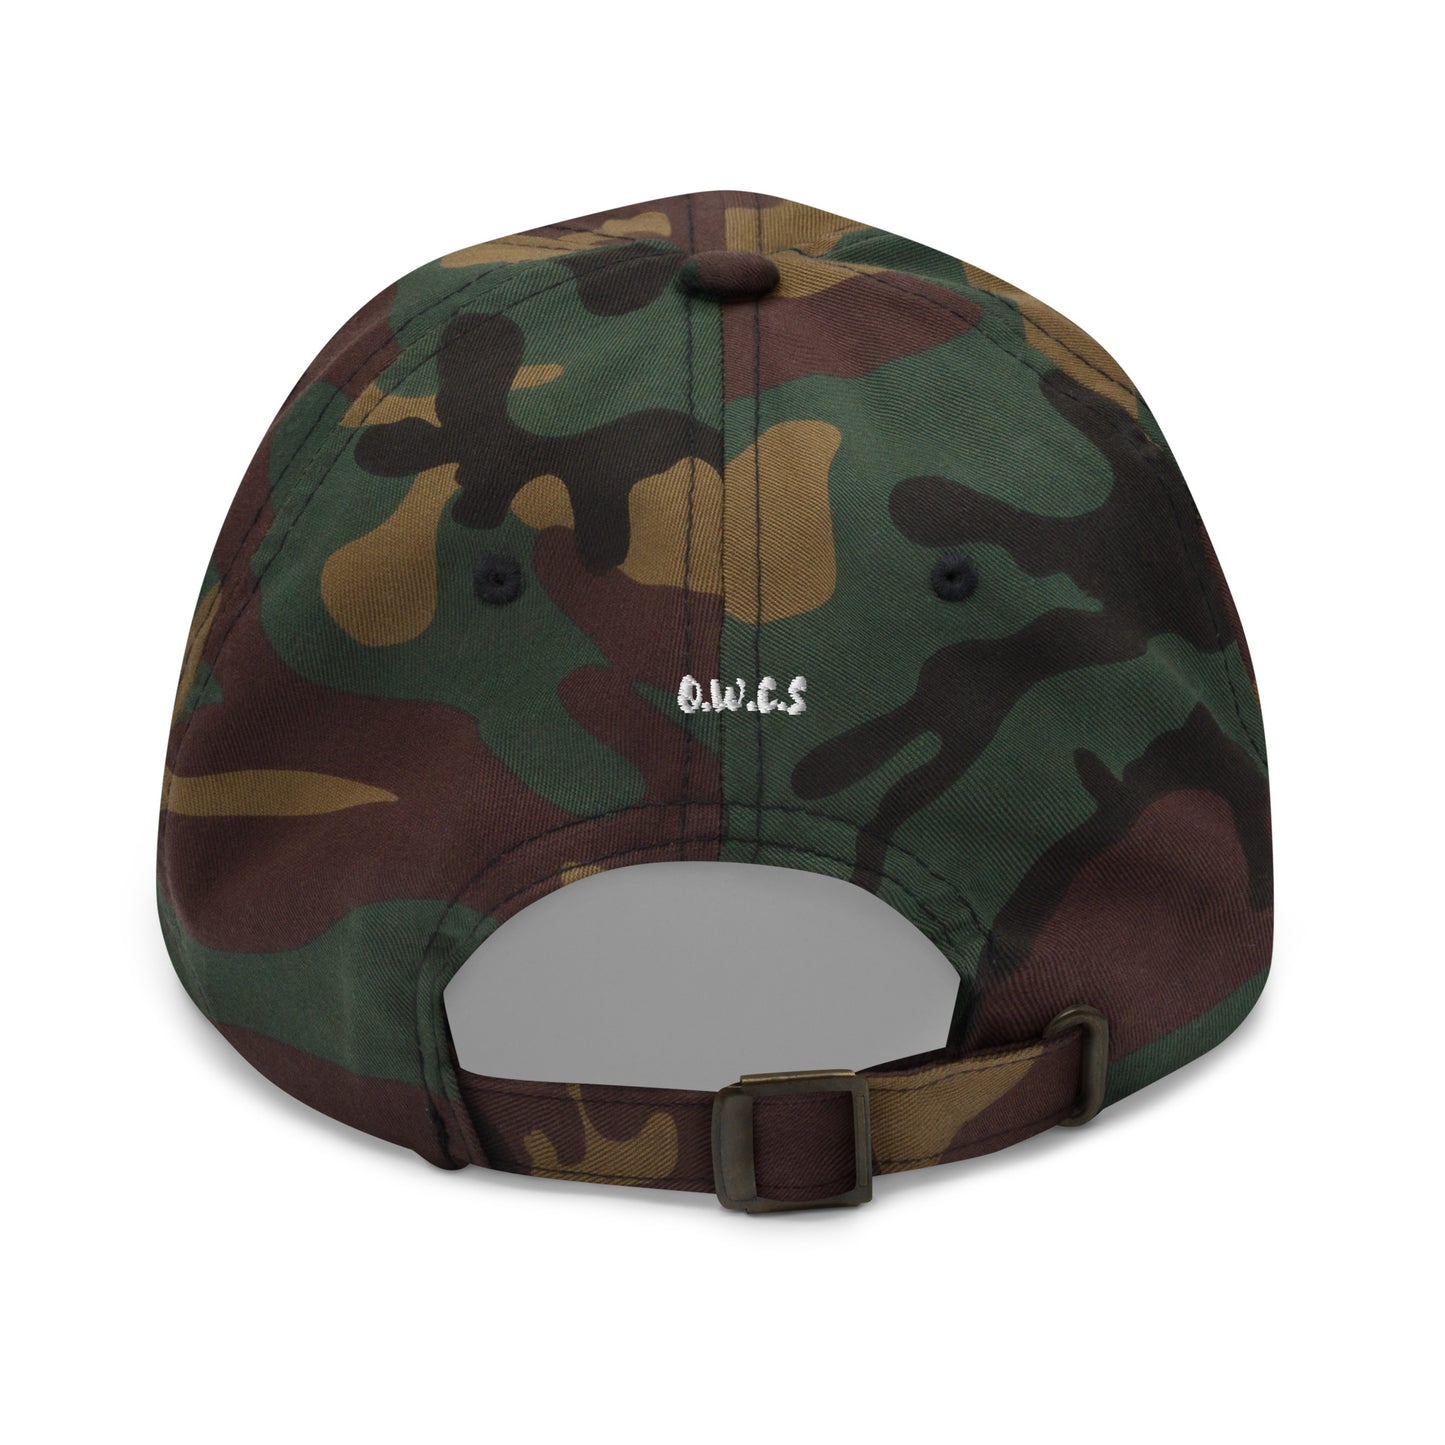 Christian hat camo green color